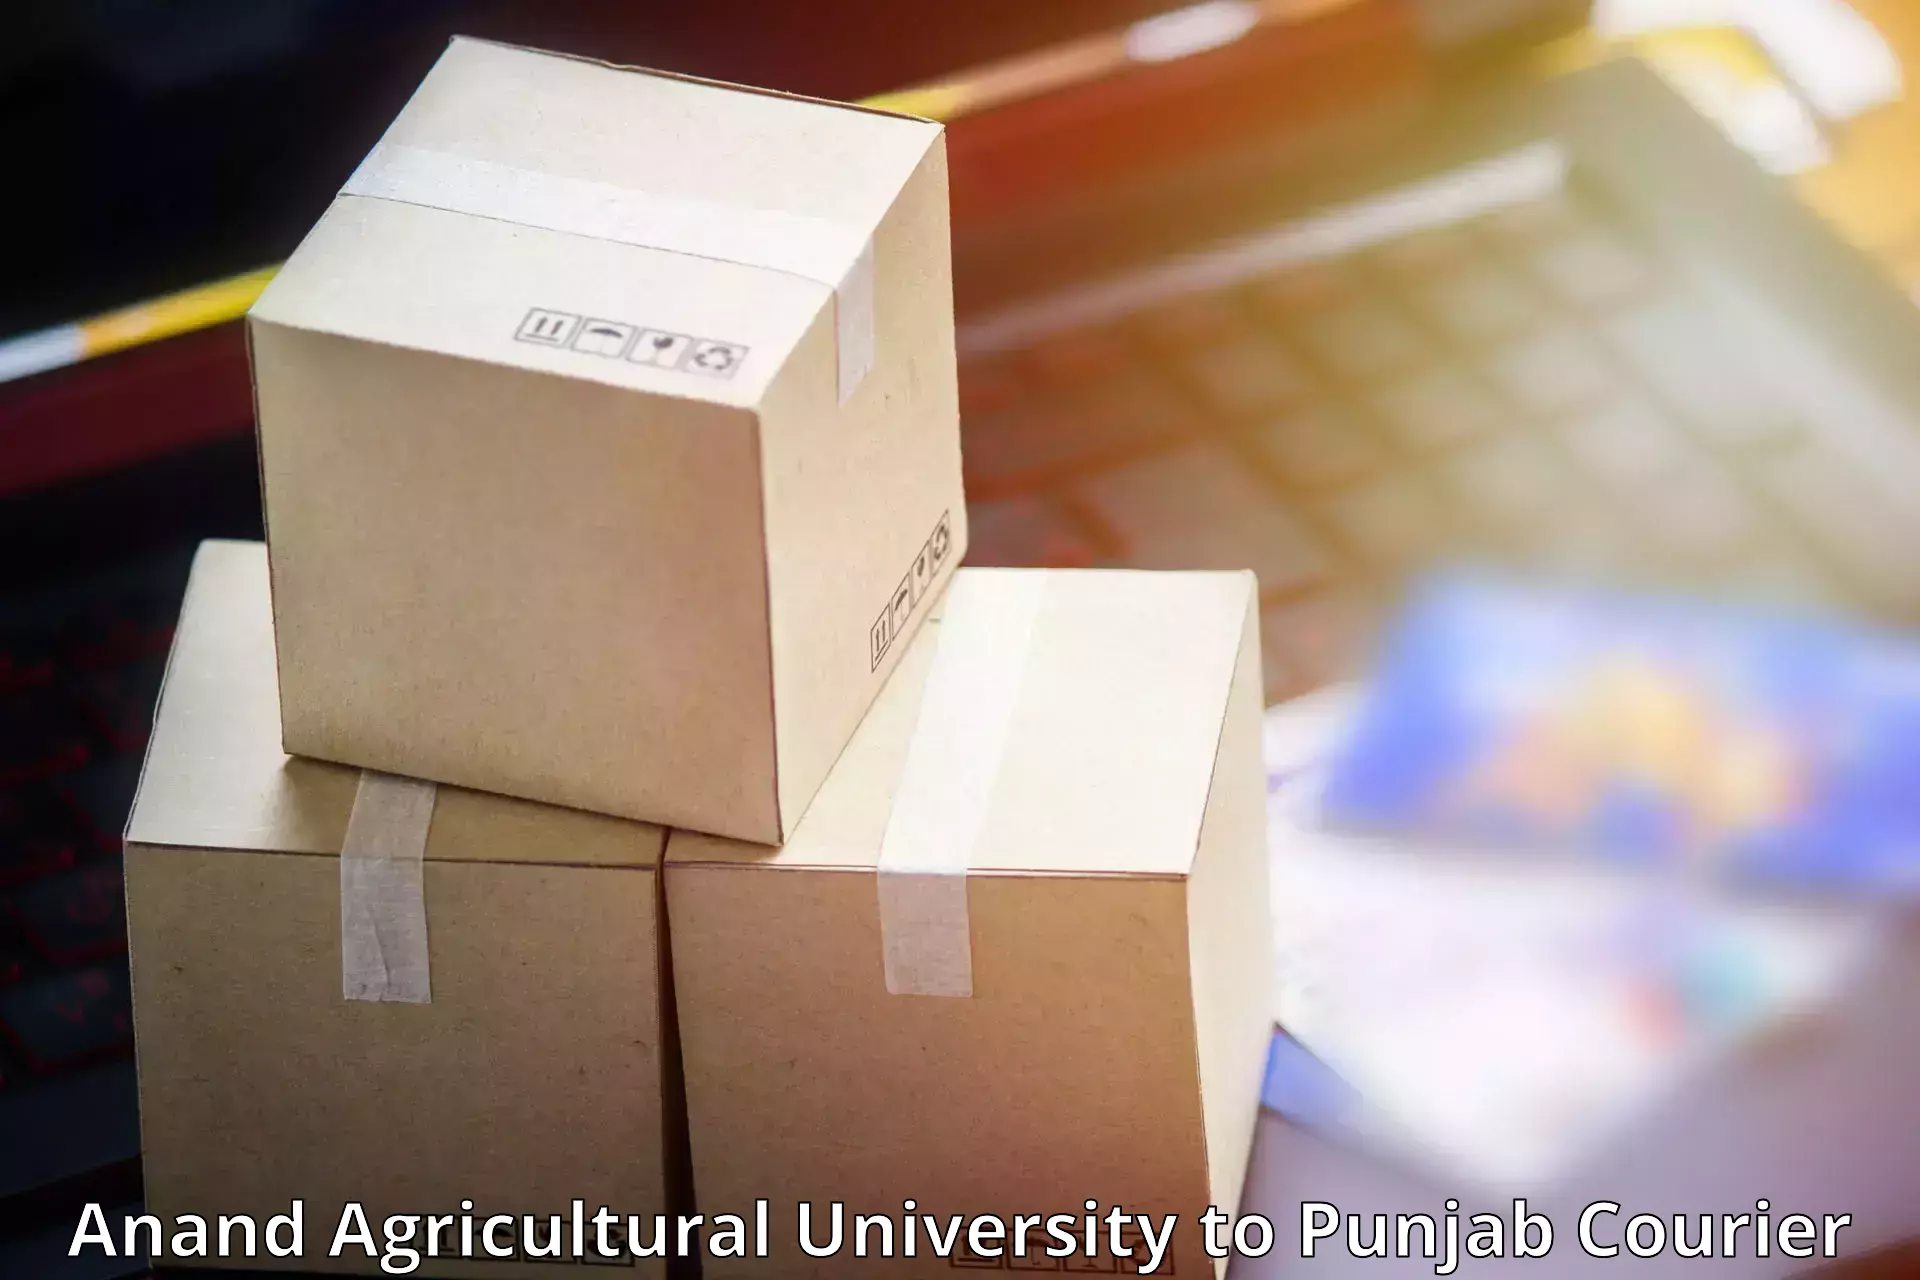 Custom shipping services Anand Agricultural University to Goindwal Sahib